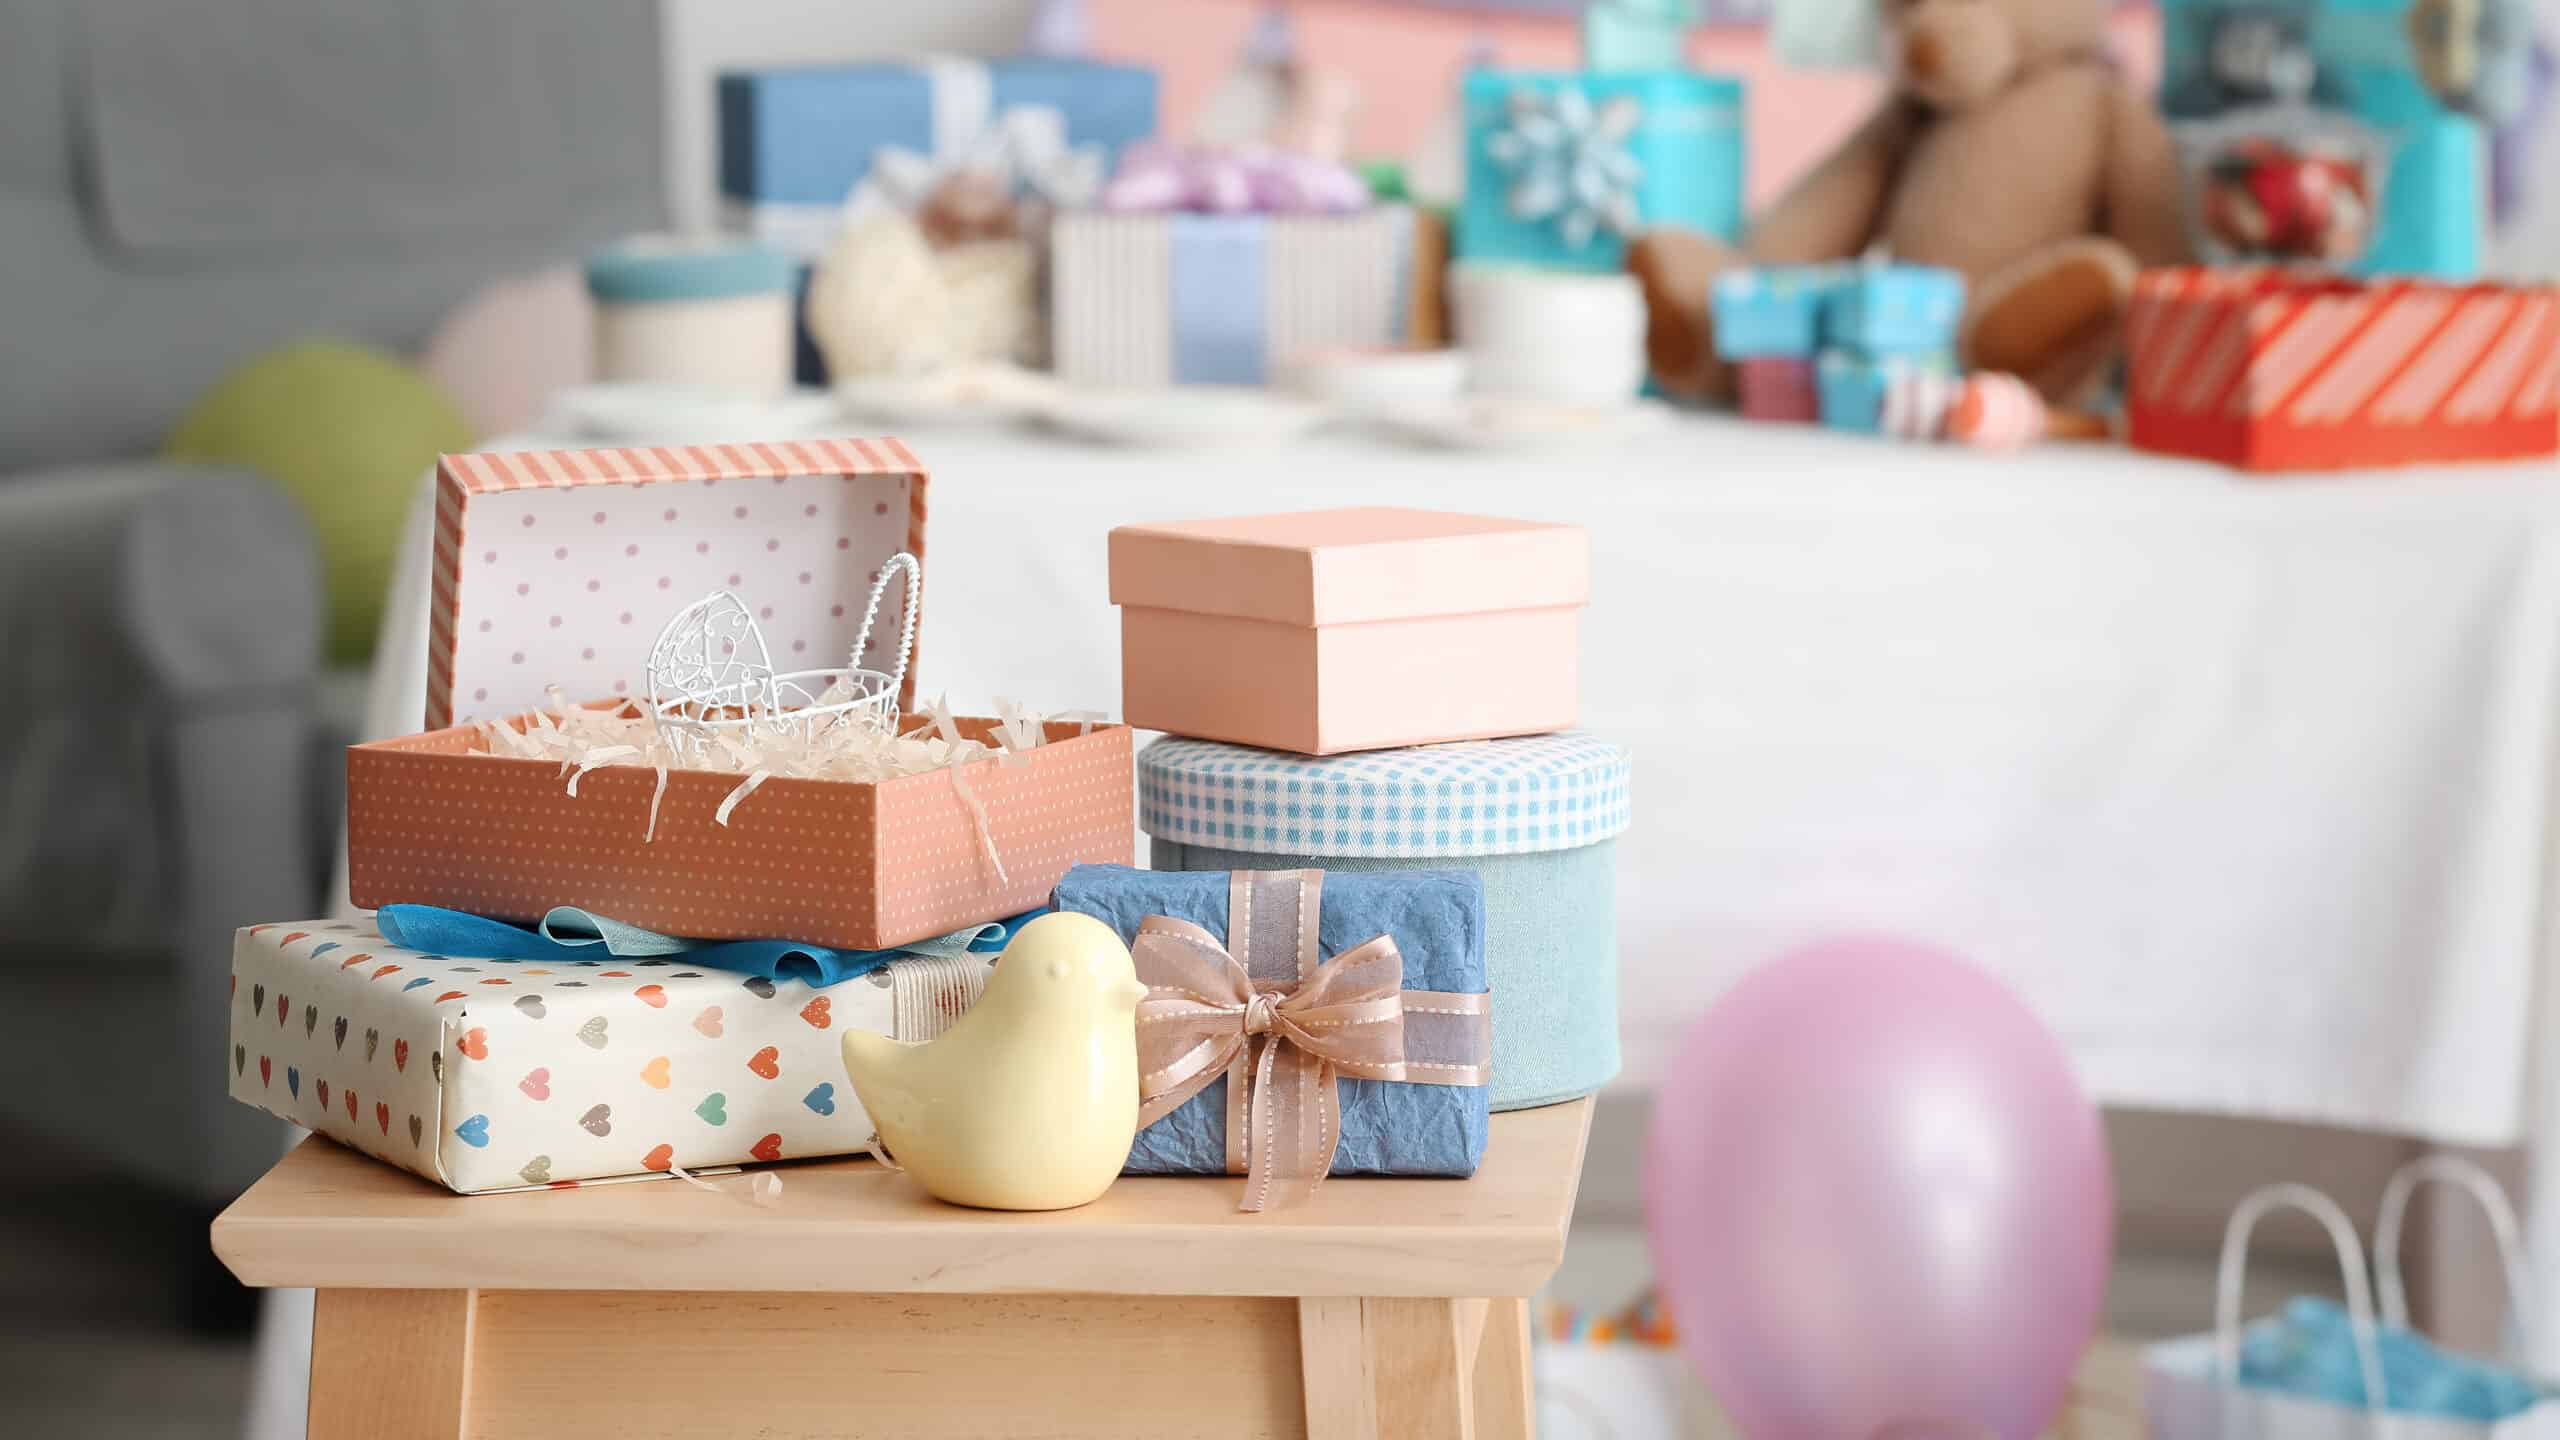 Presents and decorations for a baby shower